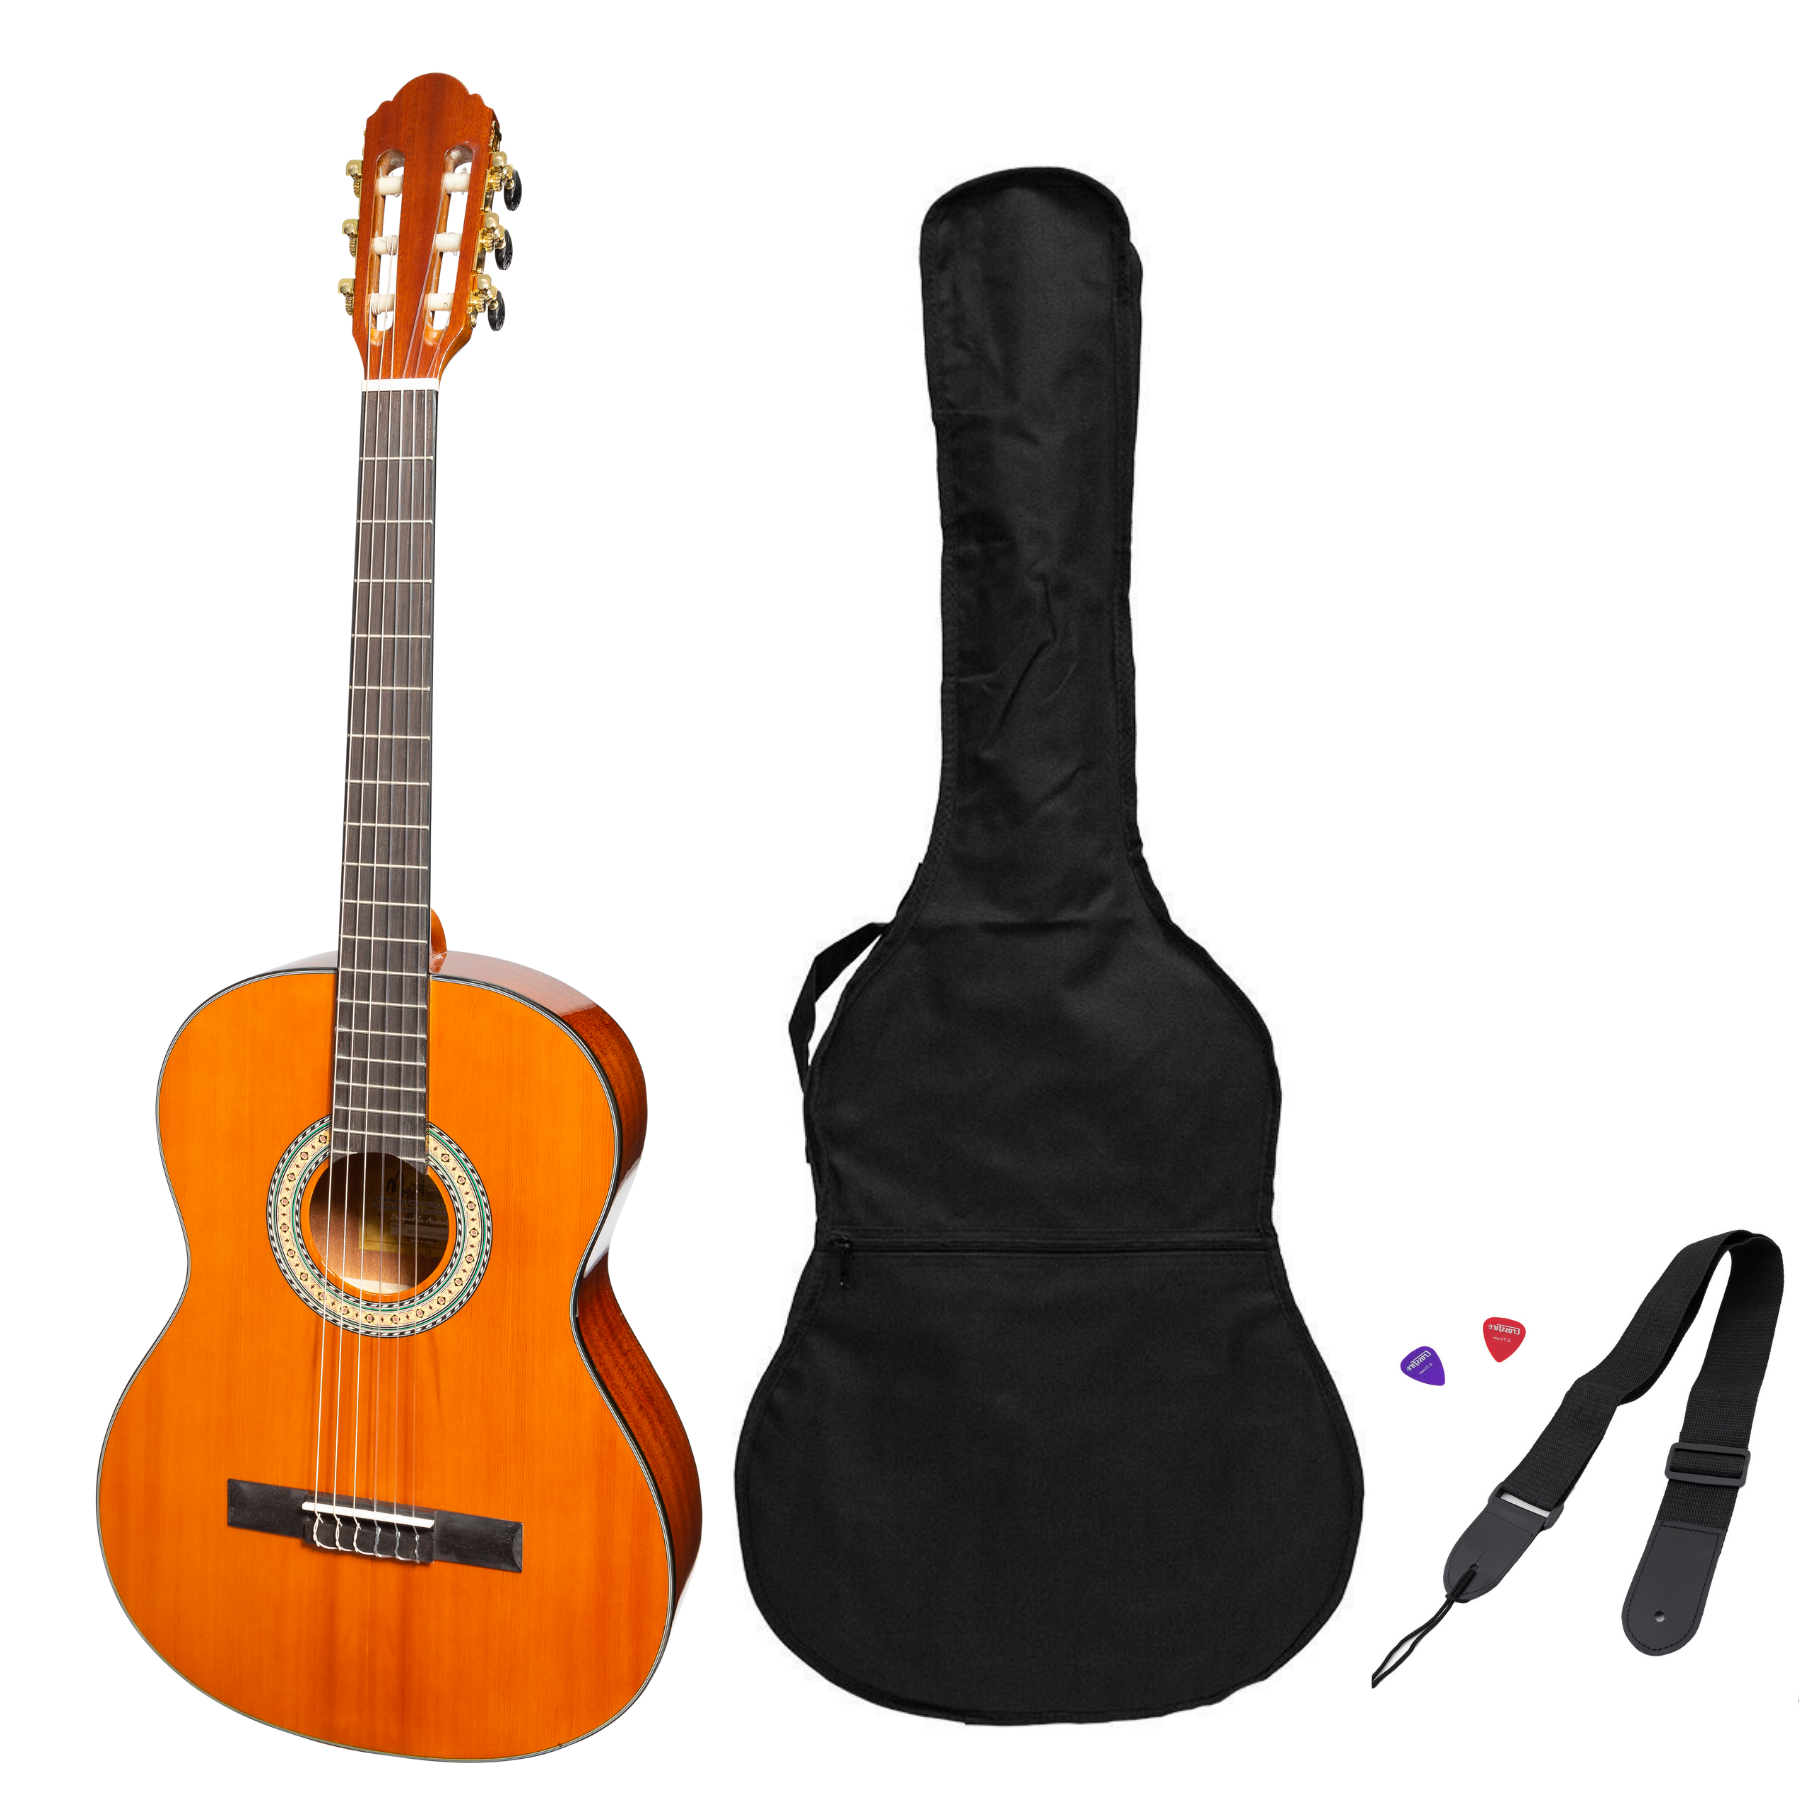 Martinez G-Series Full Size Student Classical Guitar Pack with Built In Tuner (Amber-Gloss)-MP-44GT-AMB